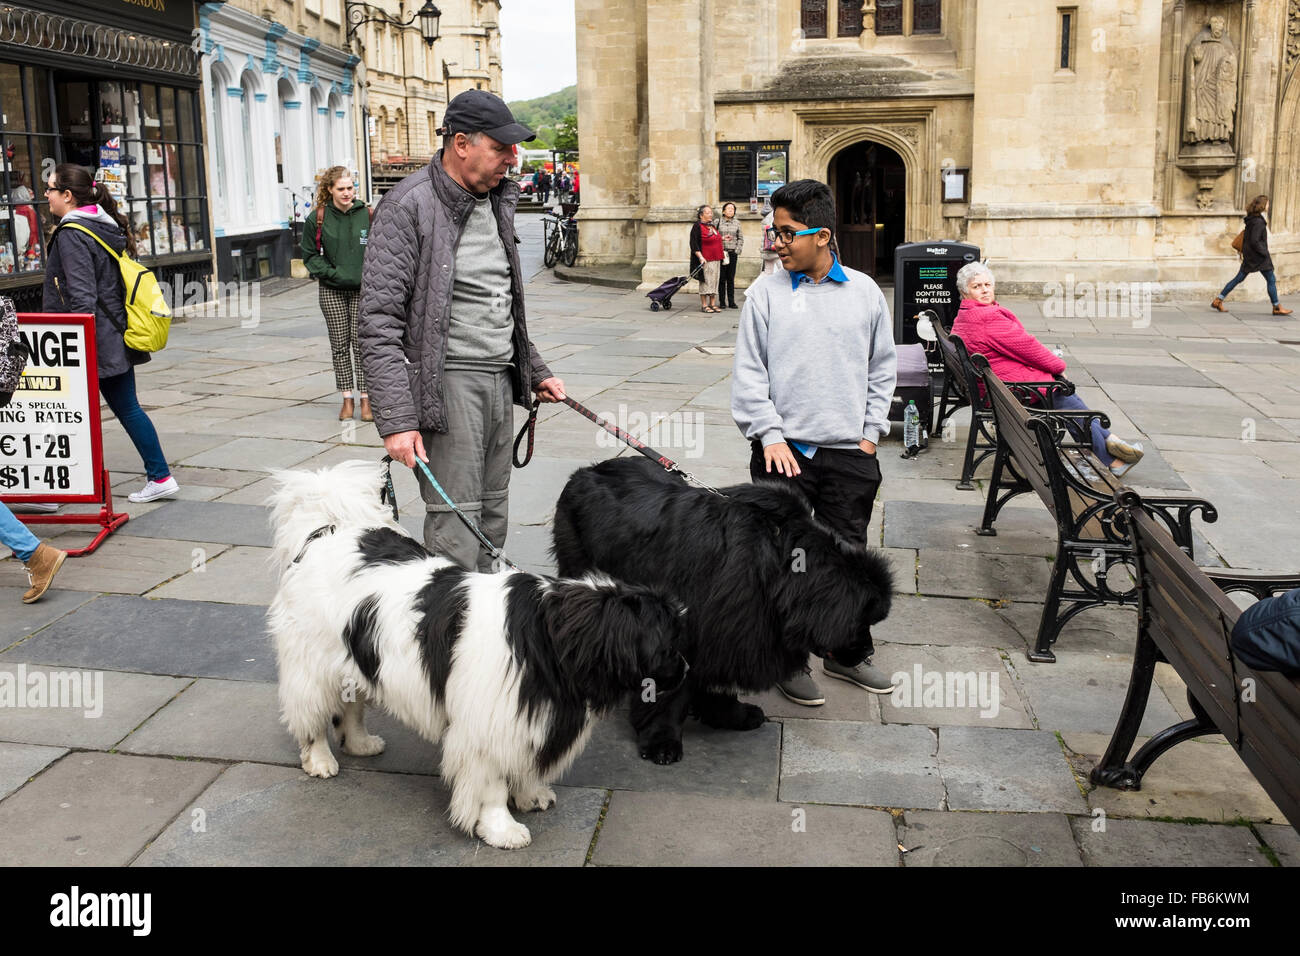 A man with two dogs (Newfoundland) talking to a boy (Bath Abbey in the background), Bath, Somerset, UK Stock Photo